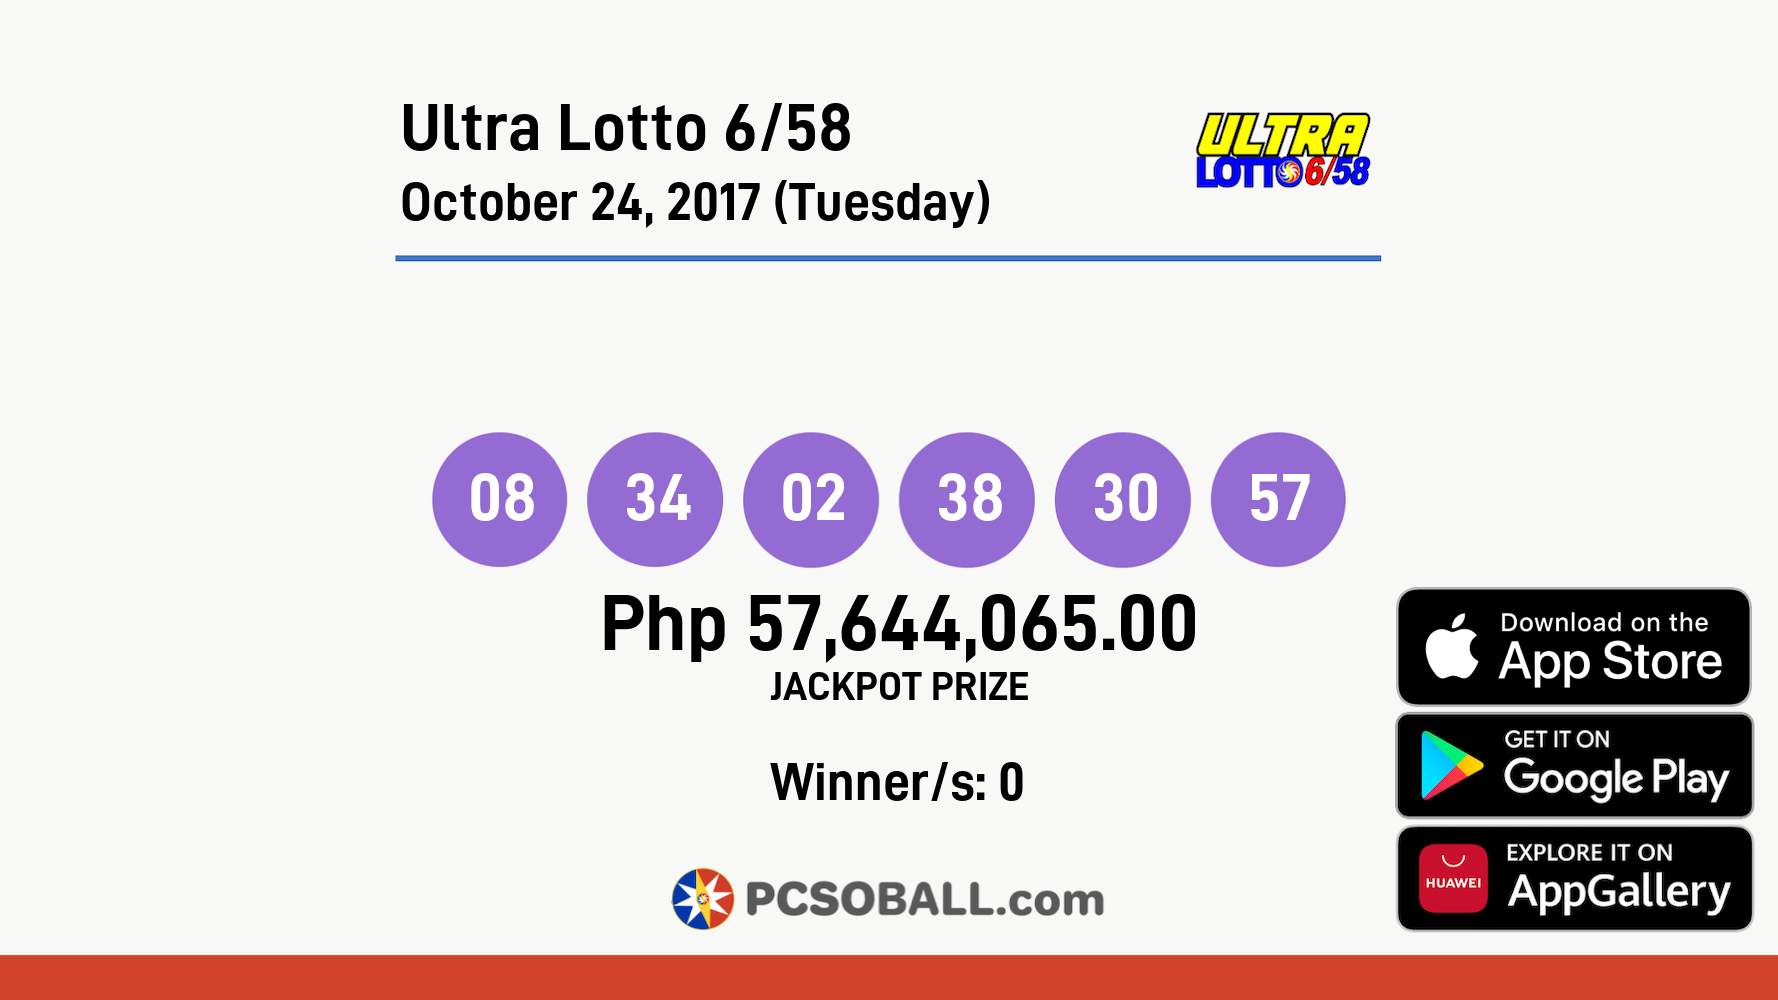 Ultra Lotto 6/58 October 24, 2017 (Tuesday) Result